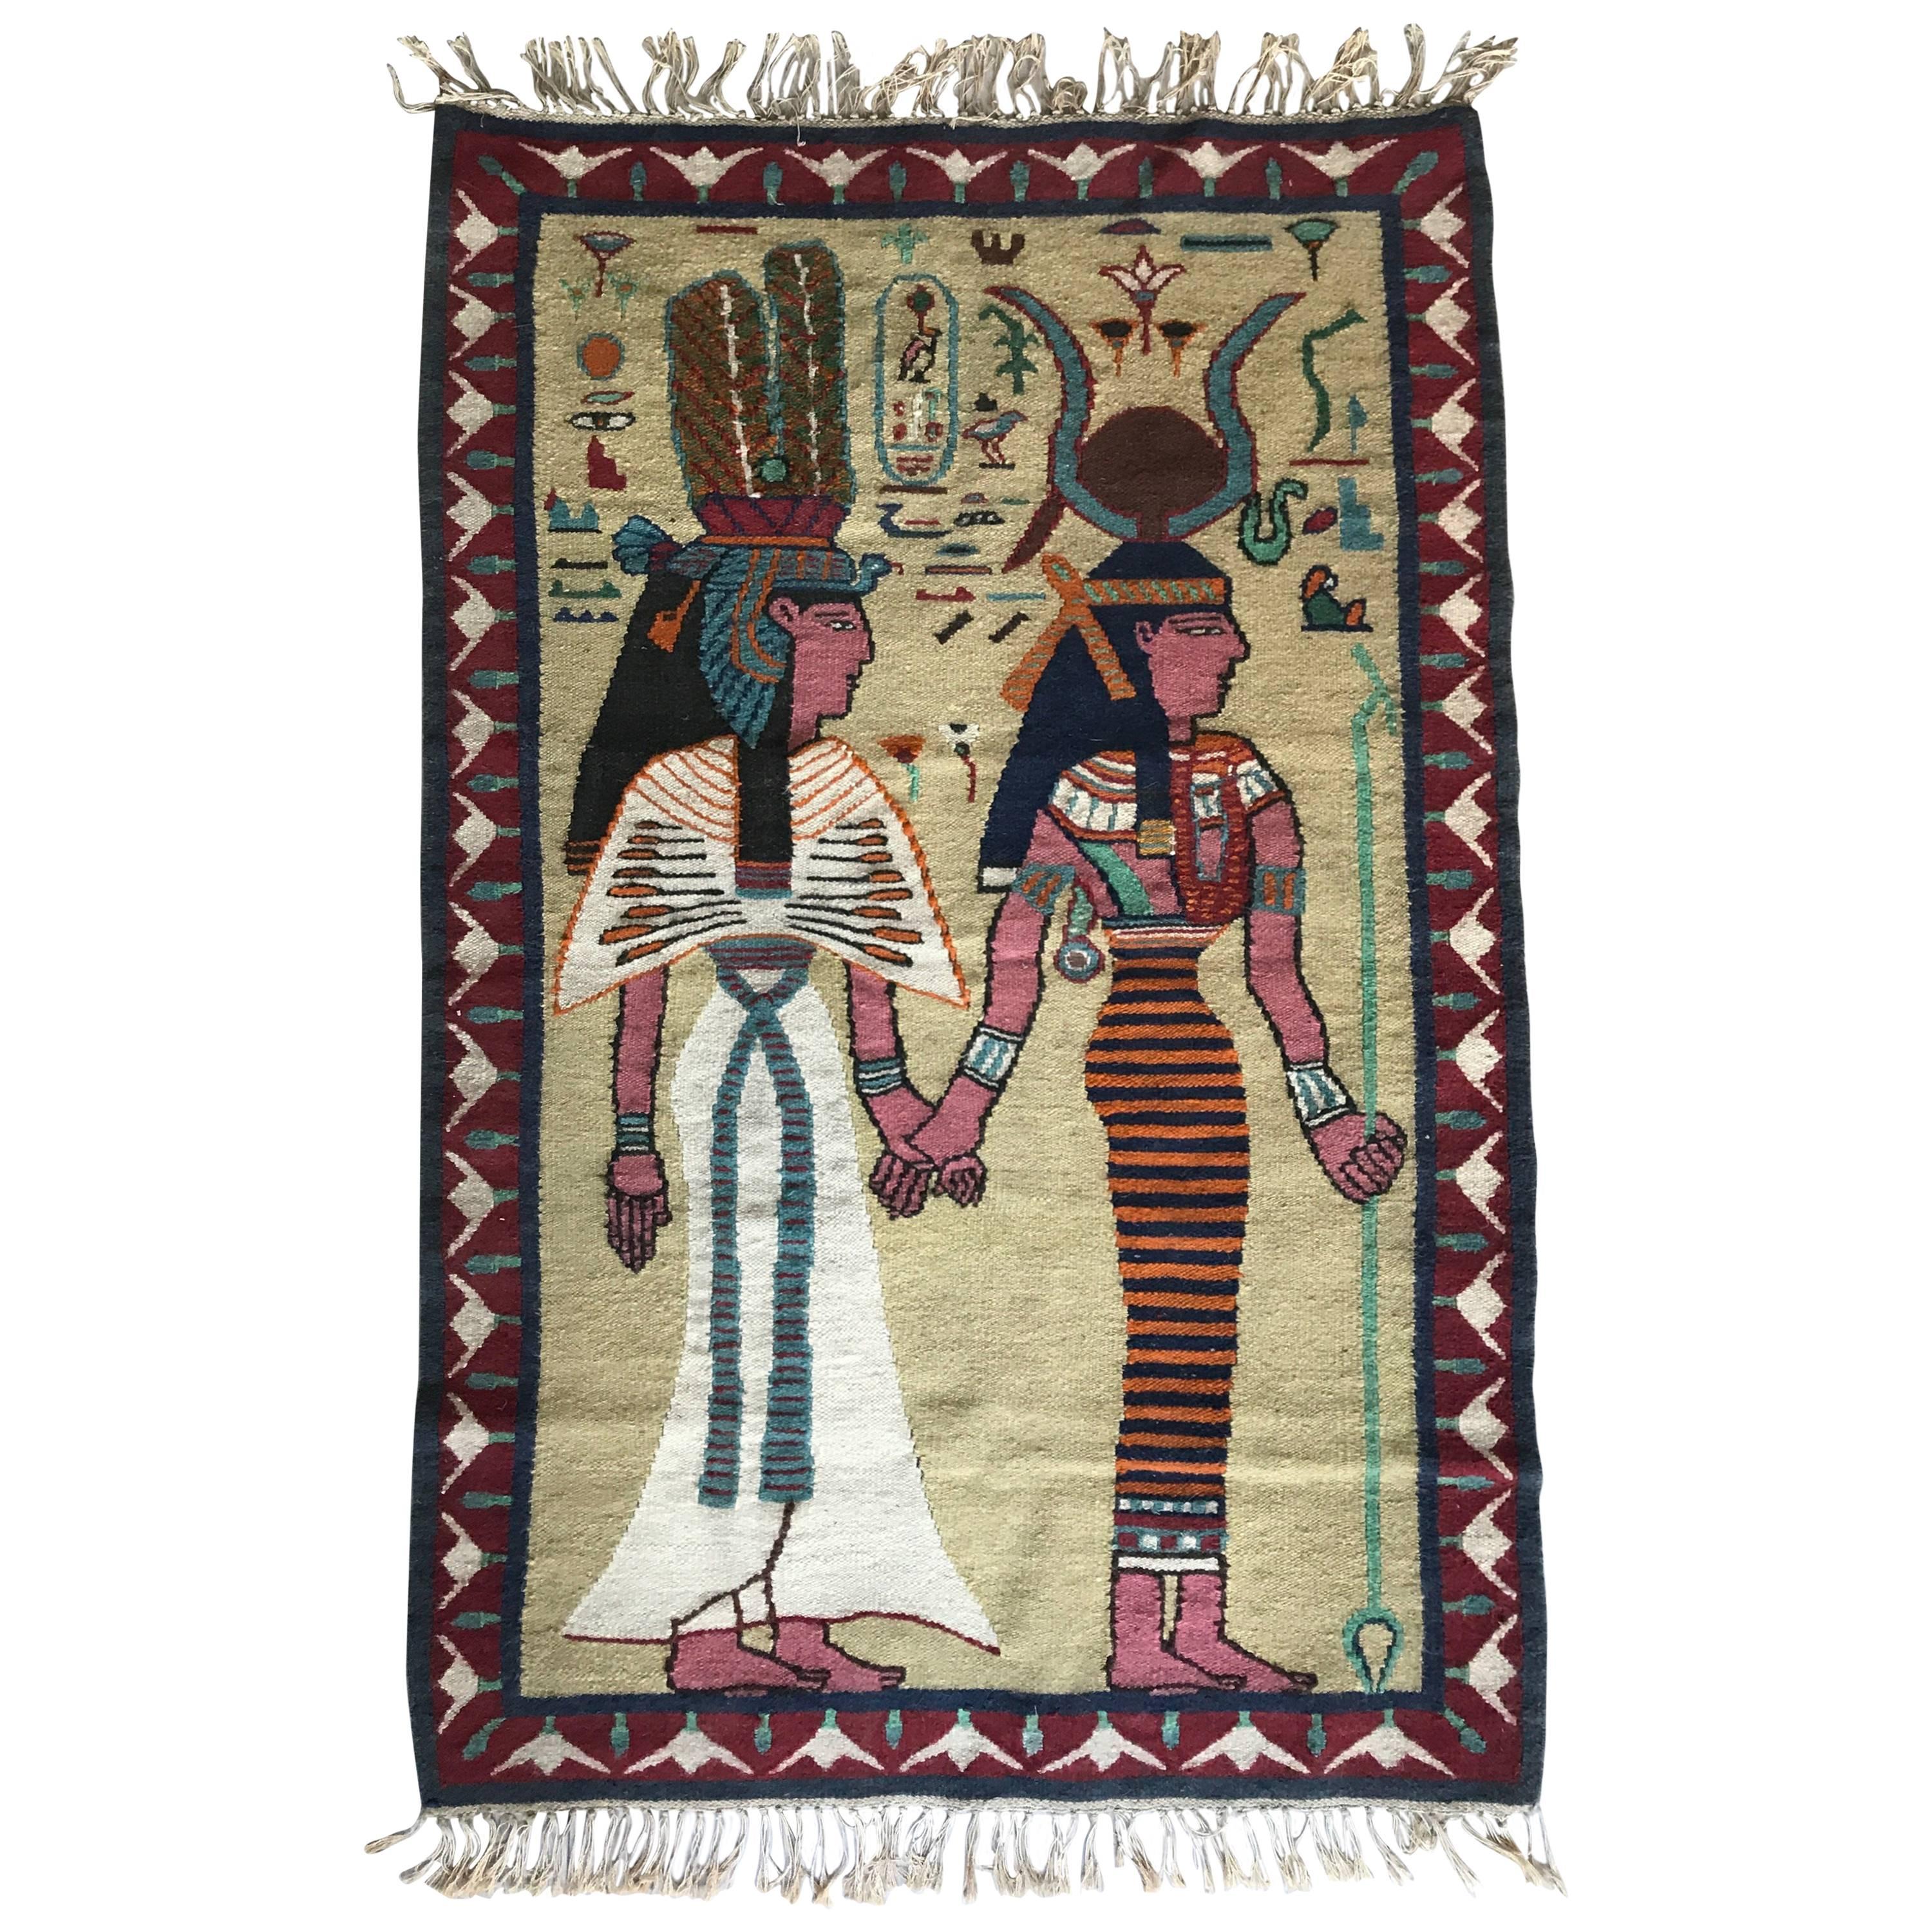 Early 20th Century Egyptian Revival Hand-Knotted Carpet / Tapestry Isis & Hathor